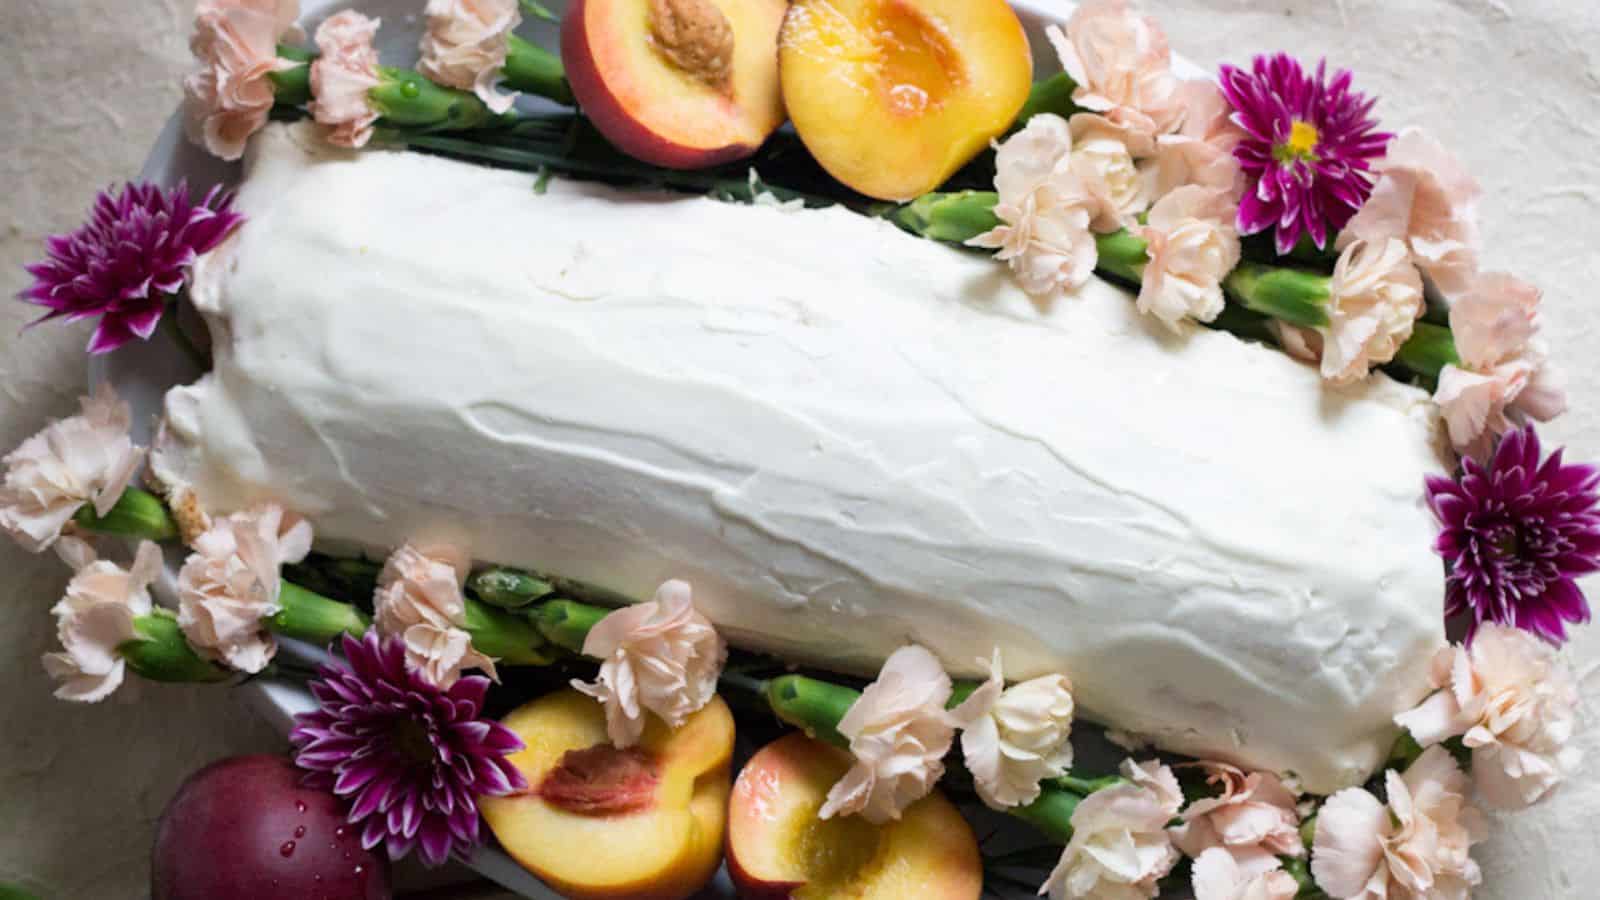 A cake topped with peaches and flowers.